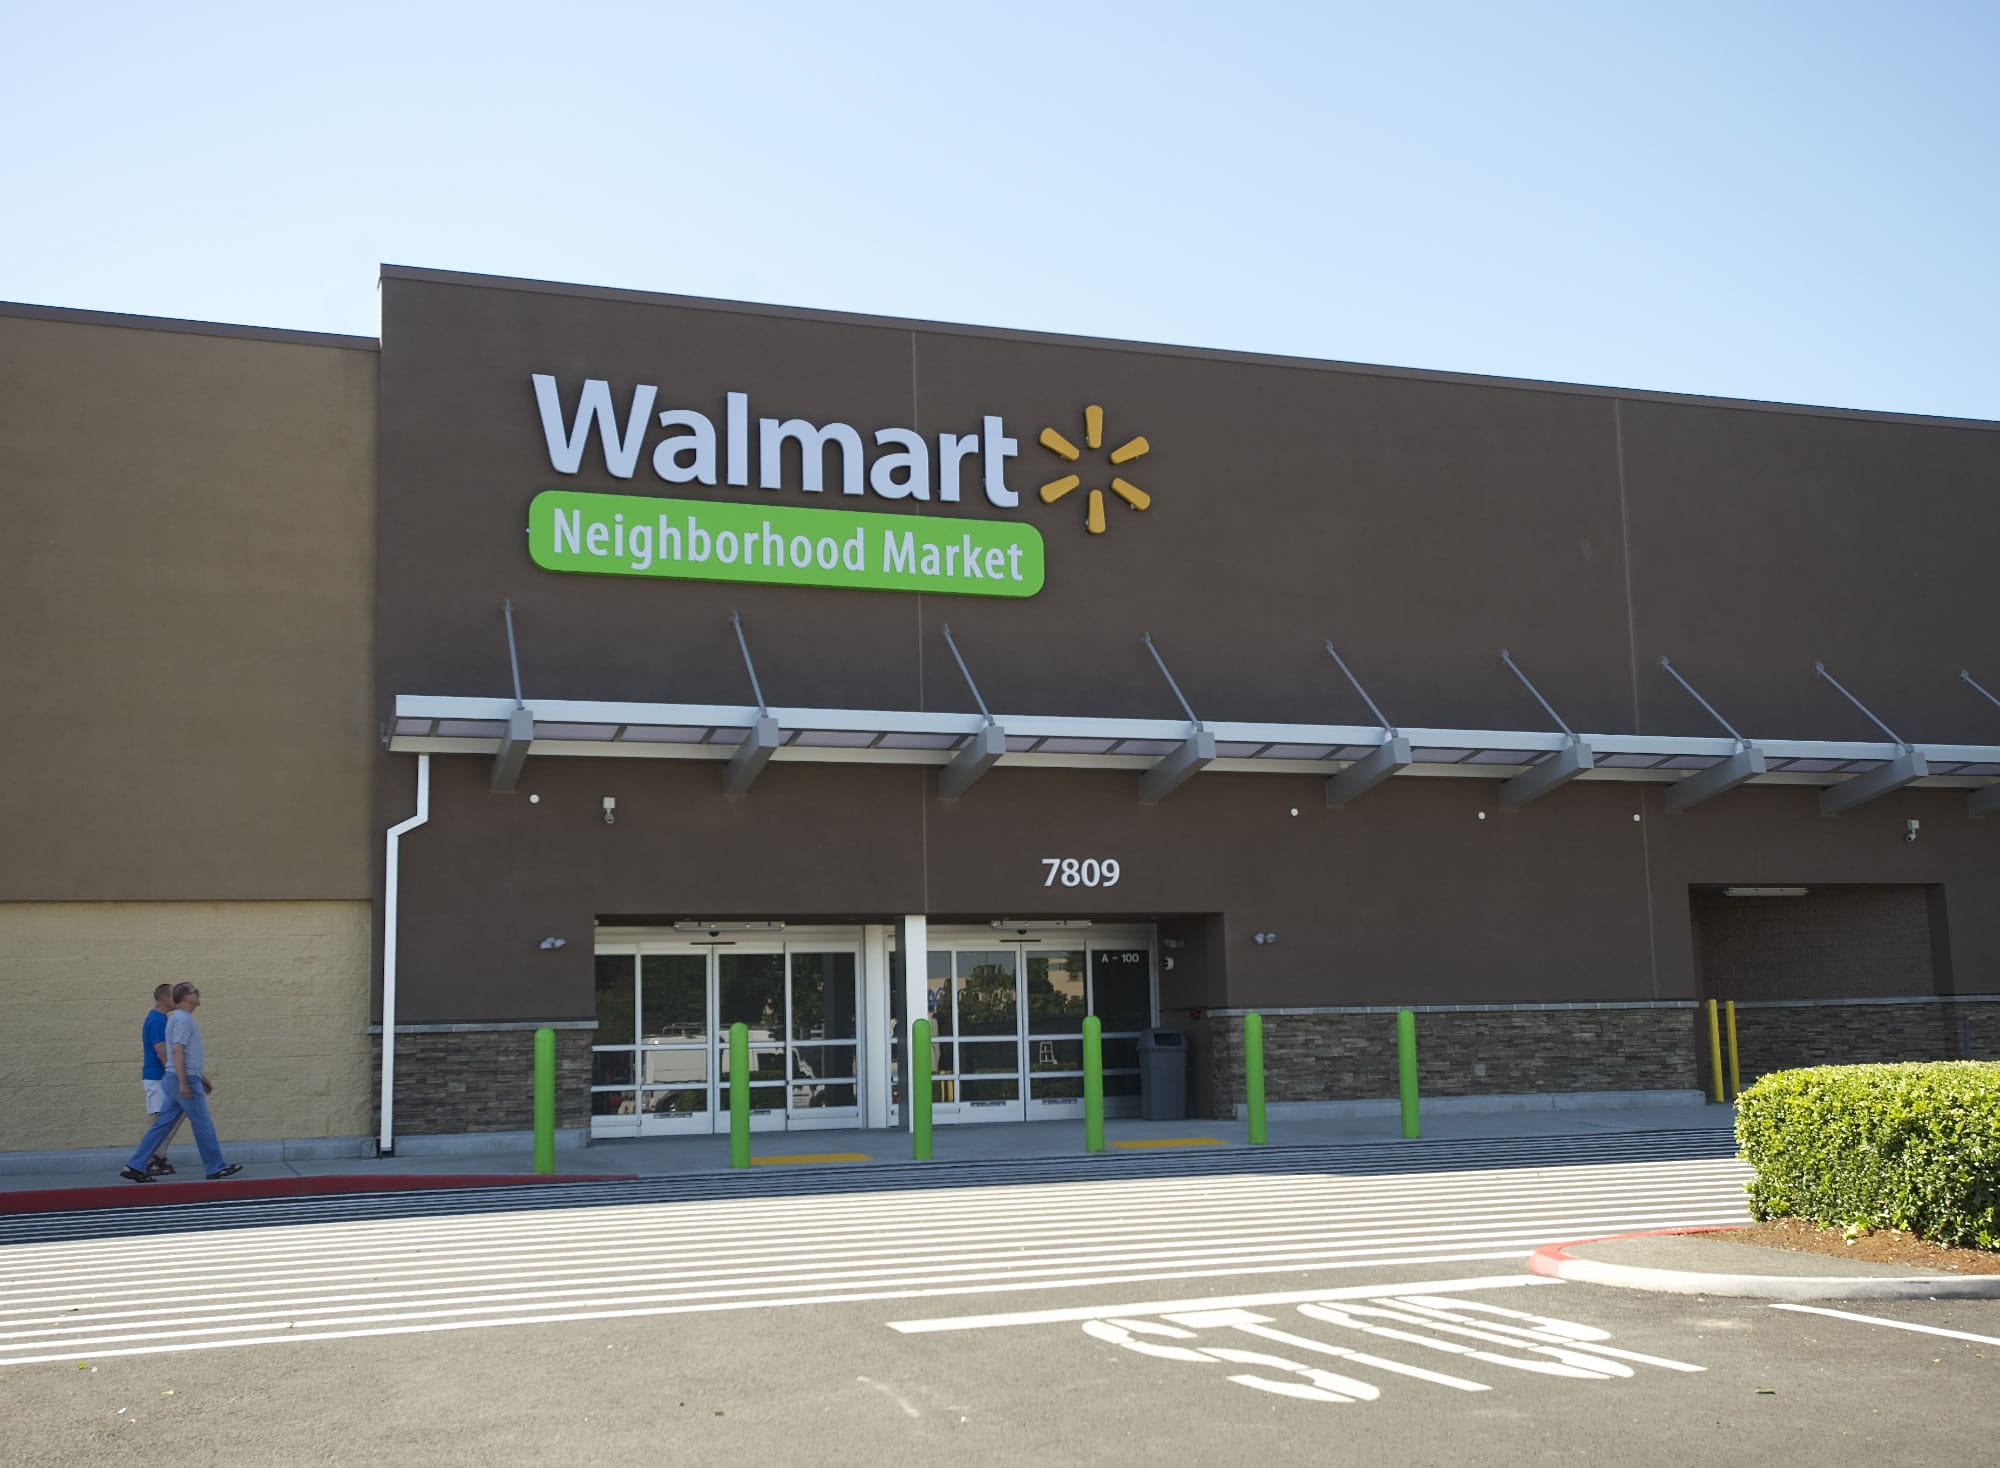 An upgraded exterior and newly paved parking lot are part of the makeover of a former WinCo Foods store that has become Vancouver's first Walmart Neighborhood Market, set to open in mid-July.